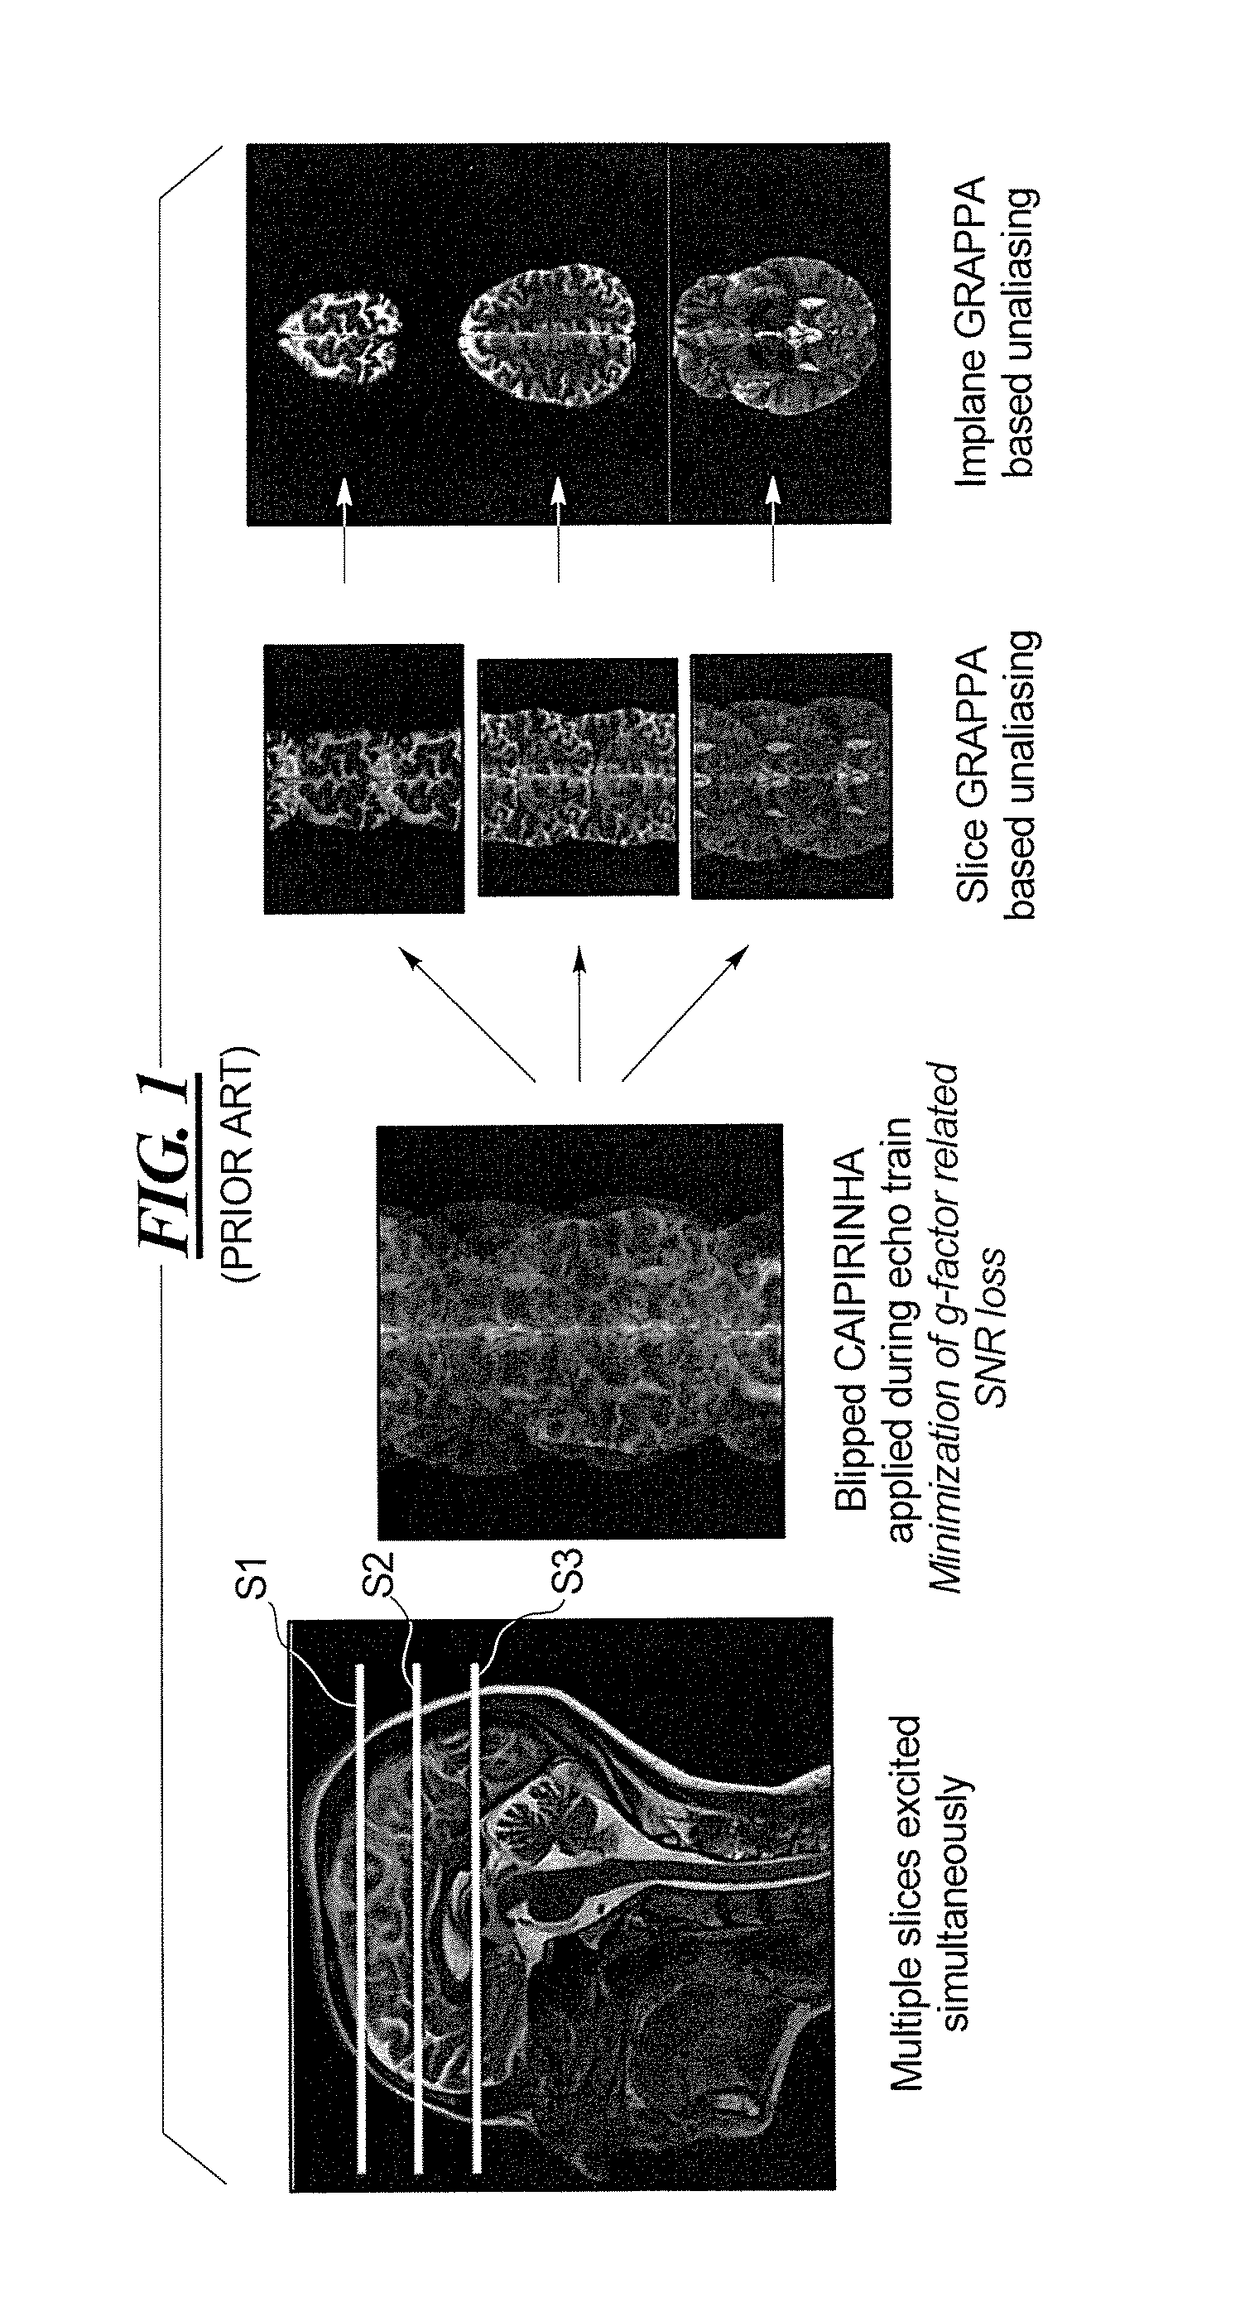 Simultaneous multi-slice magnetic resonance imaging with spin excitation using a multi-band radio-frequency pulse